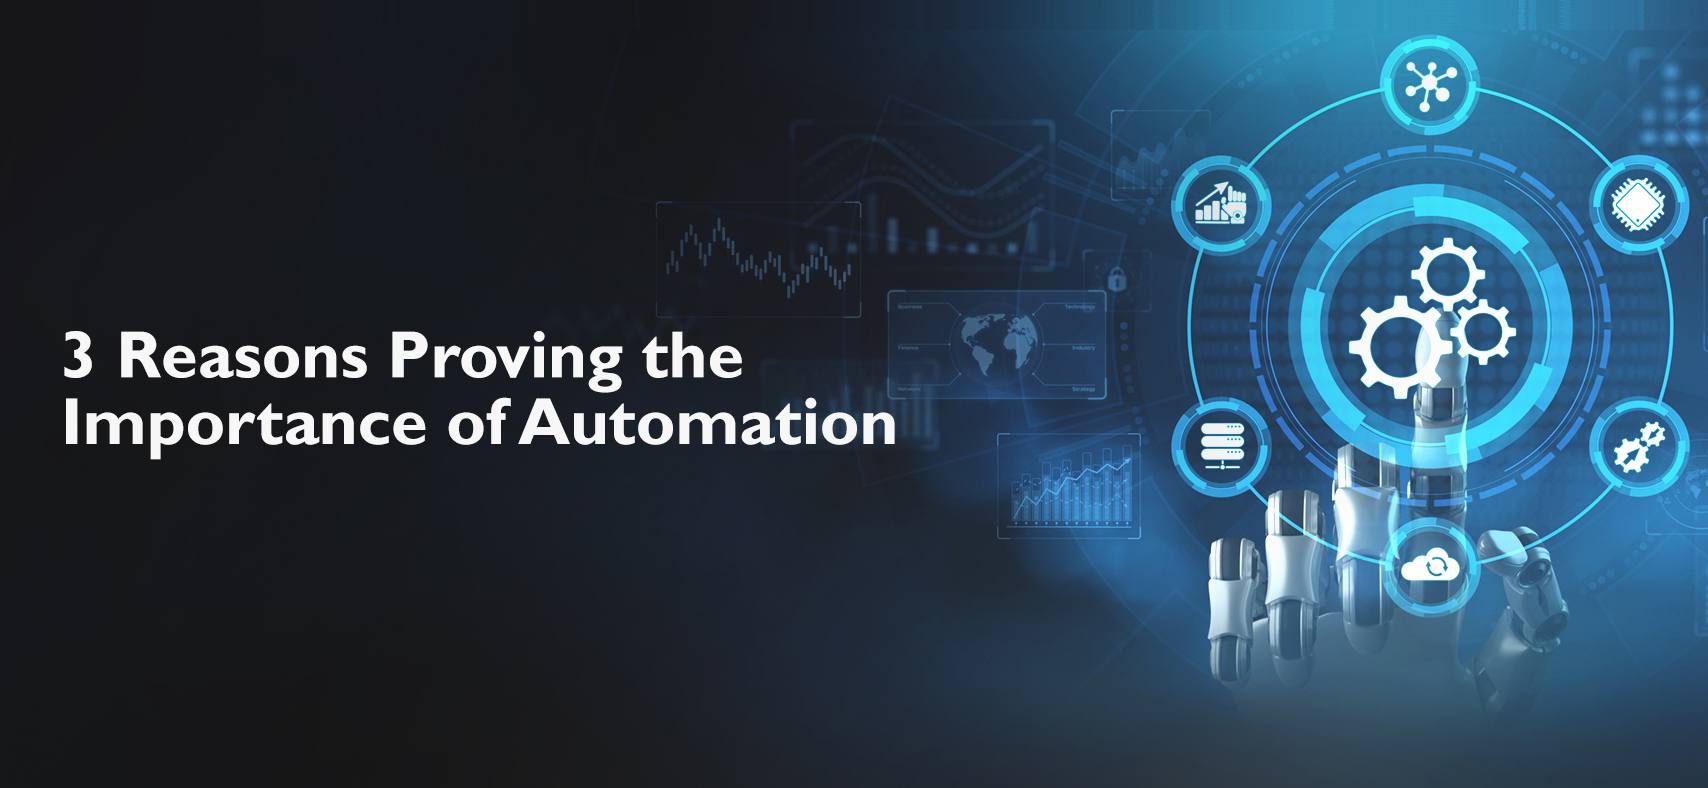 3 Reasons Proving the Importance of Automation